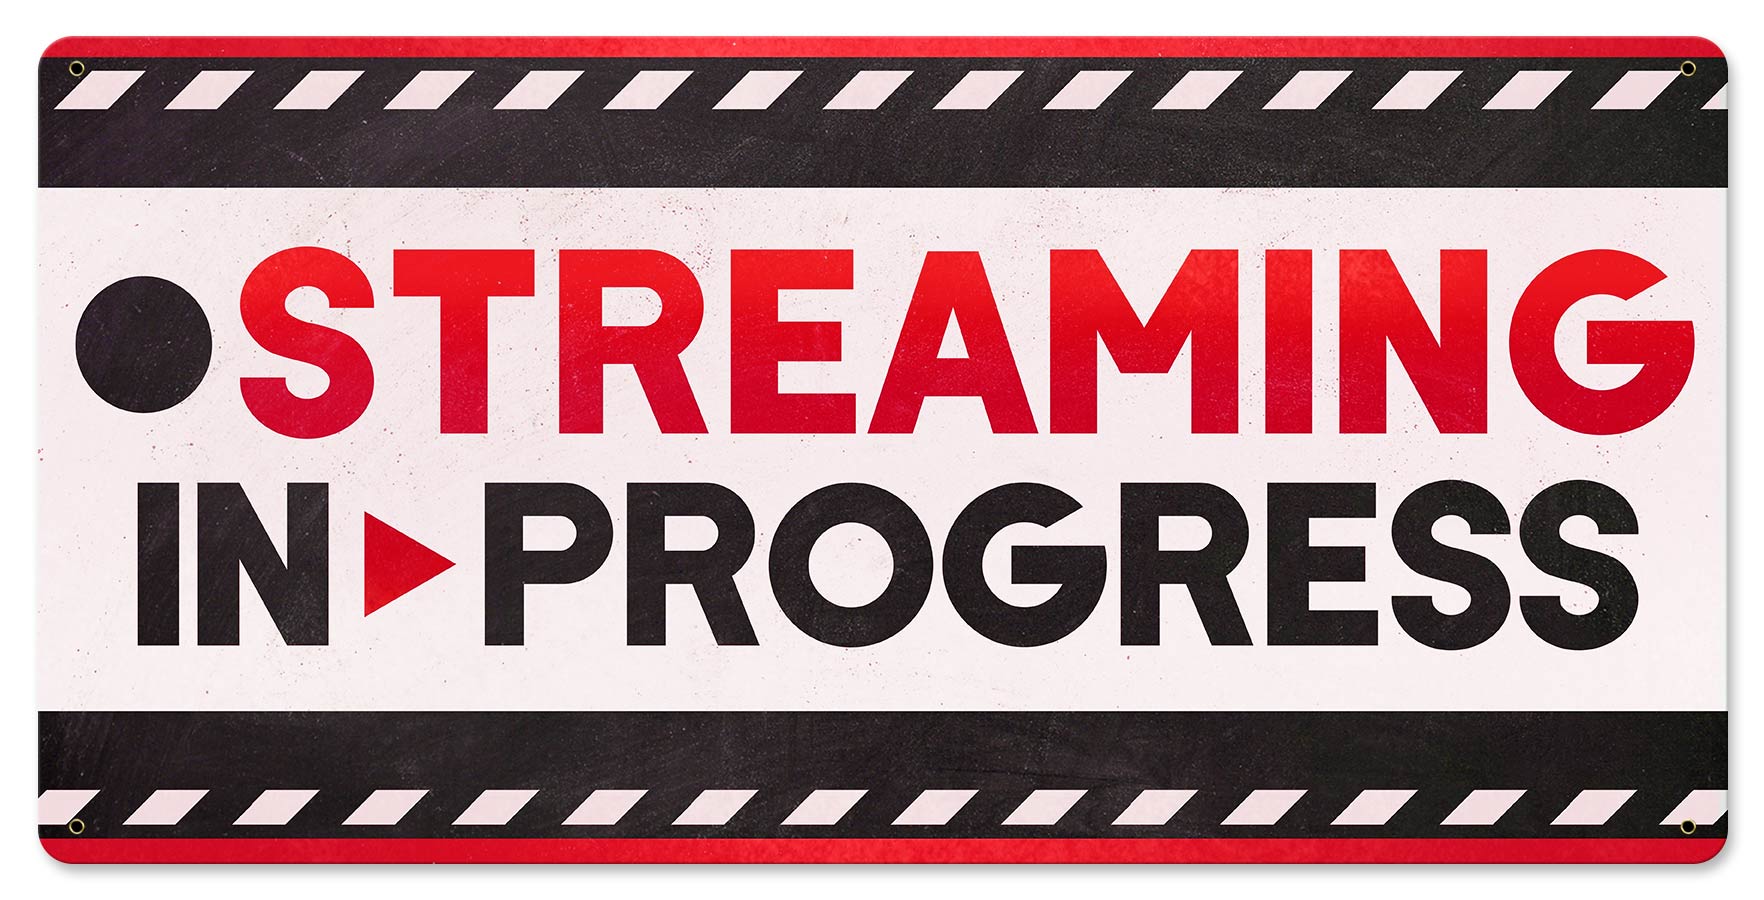 PTSB259 - STREAMING IN PROGRESS RED Vintage Sign